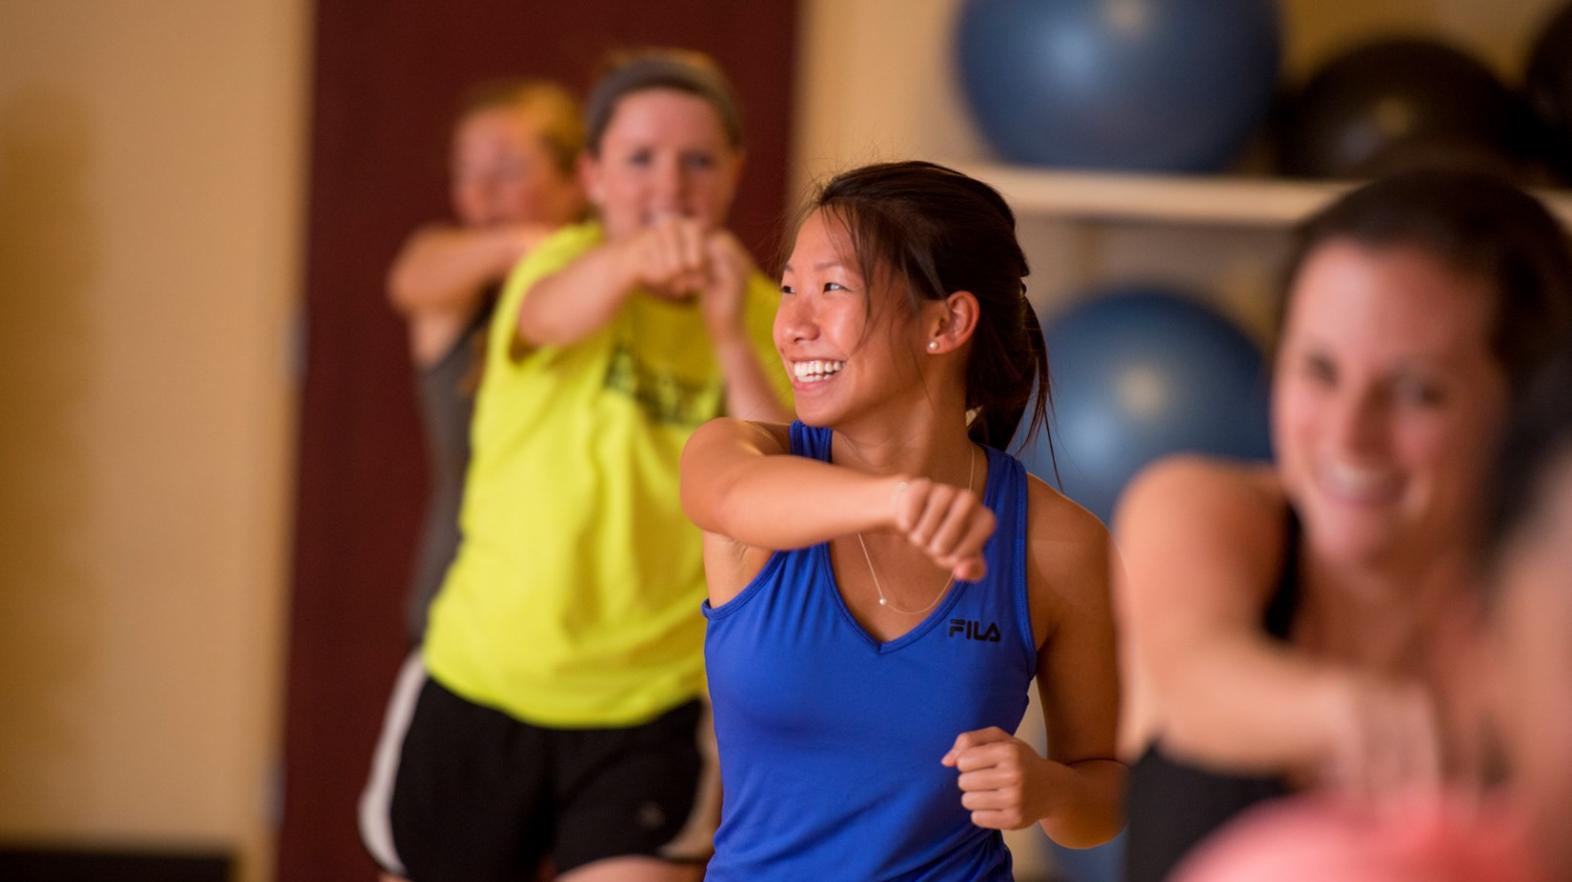 Female students smile as they work out in a group exercise class at Springfield College